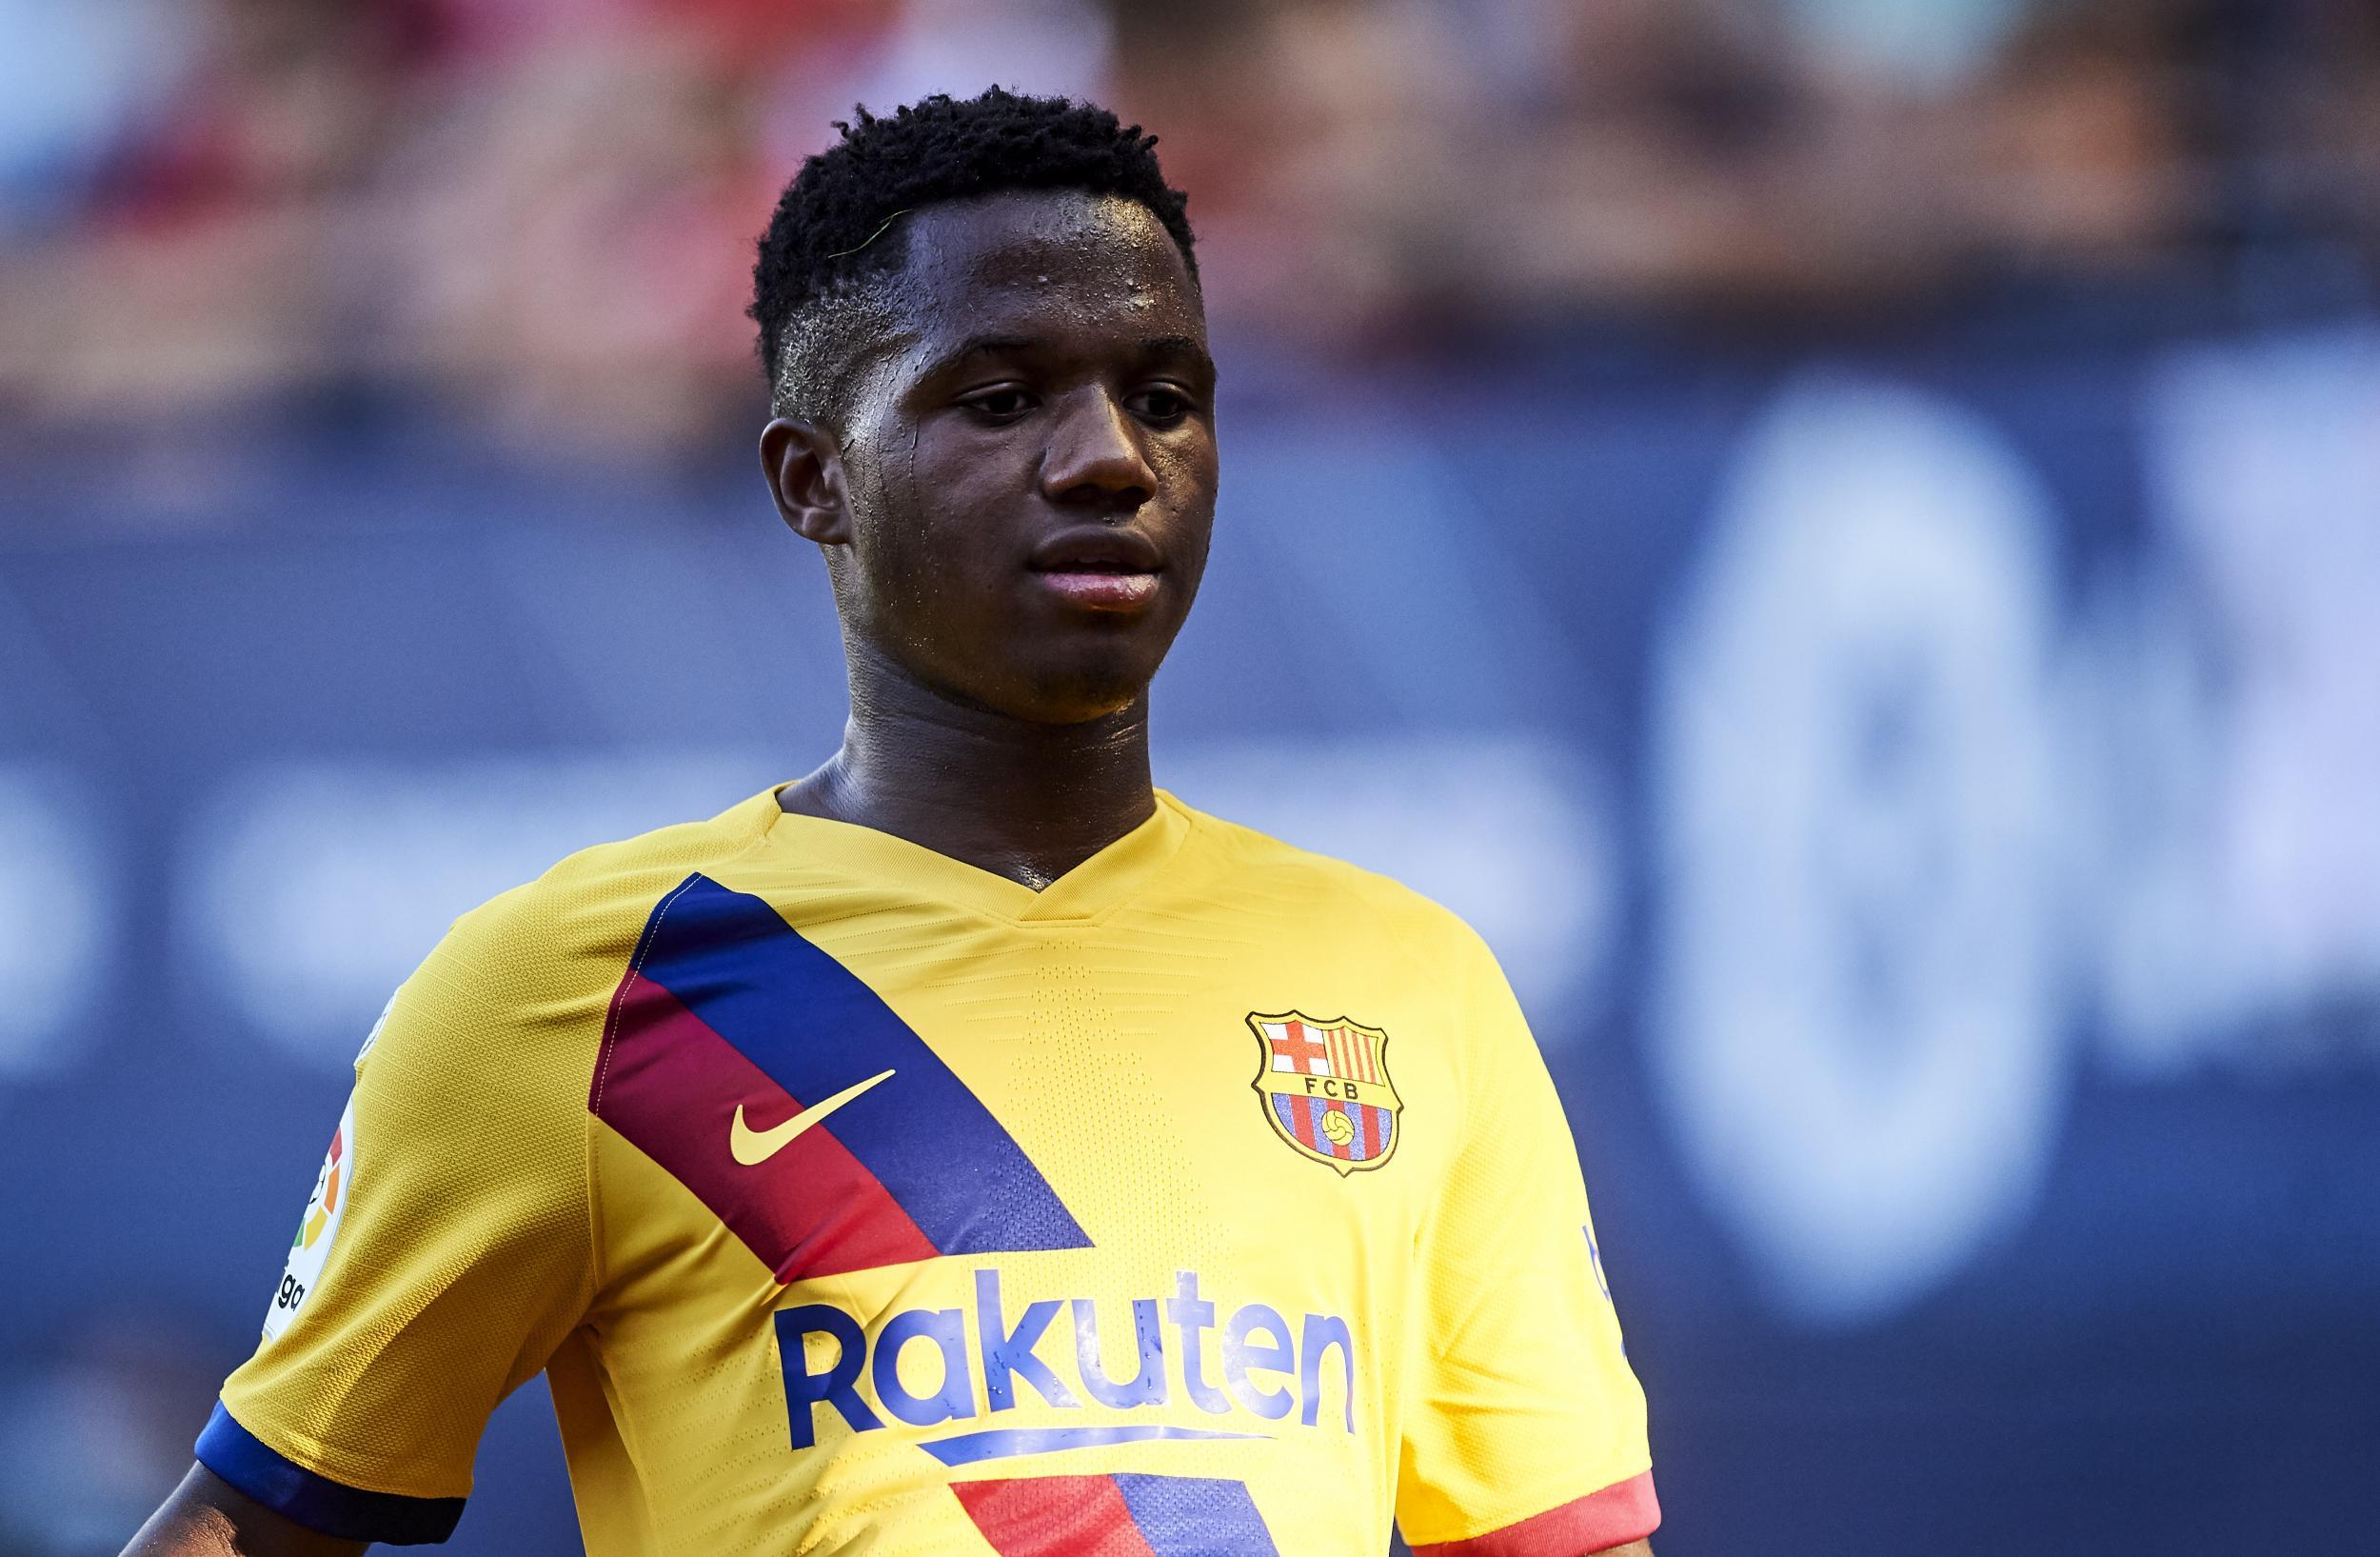 FC Barcelona News: Who Is Ansu Fati, The 16 Year Old